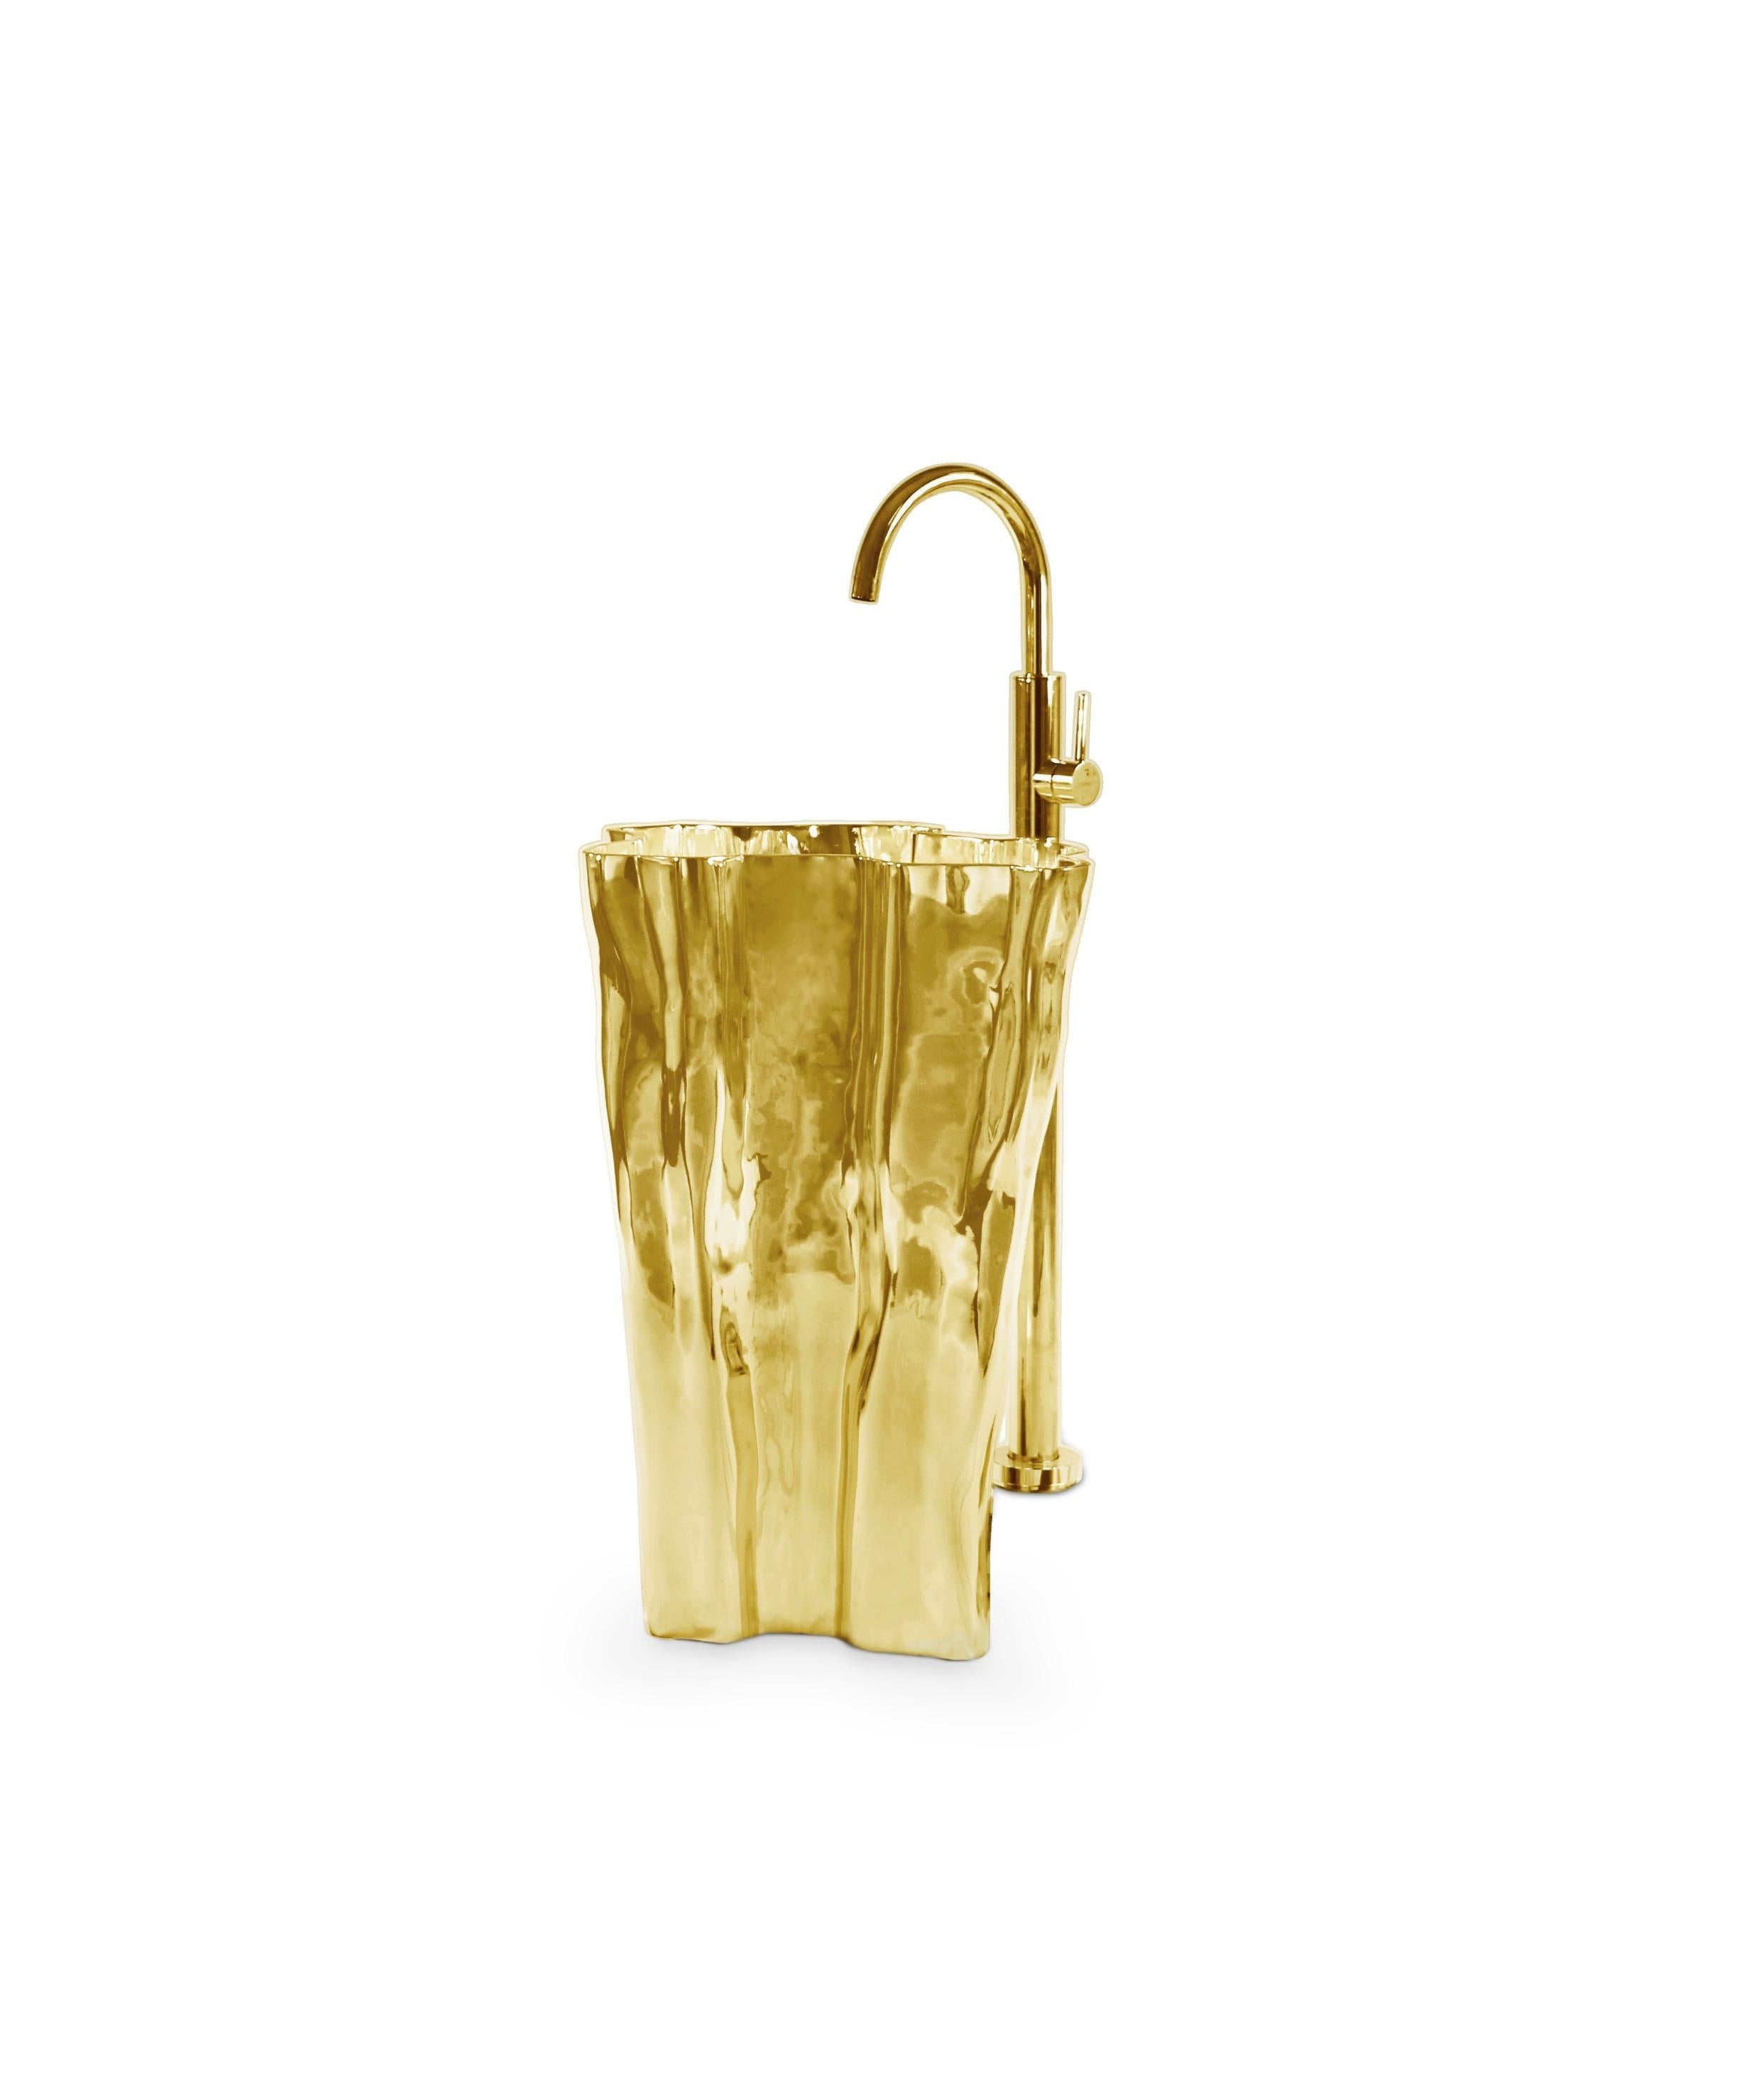 Modern Eden Casted Aluminum Freestanding by Maison Valentina

A Modern Eden Casted Aluminum Freestanding by Maison Valentina, inspired by the shape of a tree stump this frees this washbasin is made of polished casted aluminum in a gold plated color,